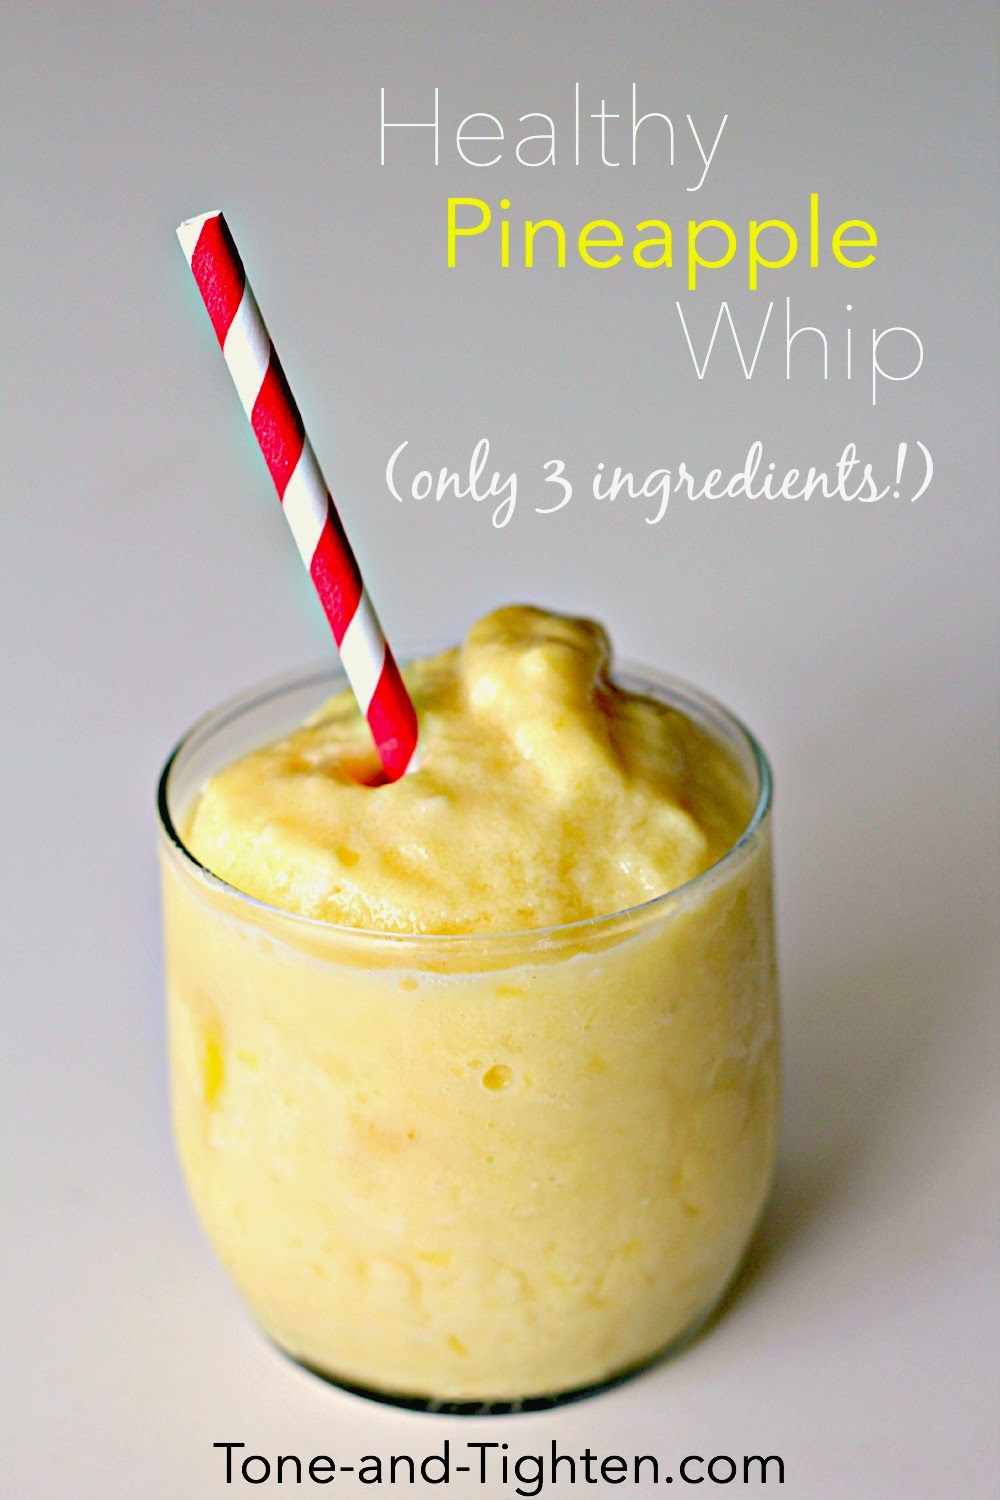 Healthy Pineapple Whips Recipe (only 3 ingredients!)